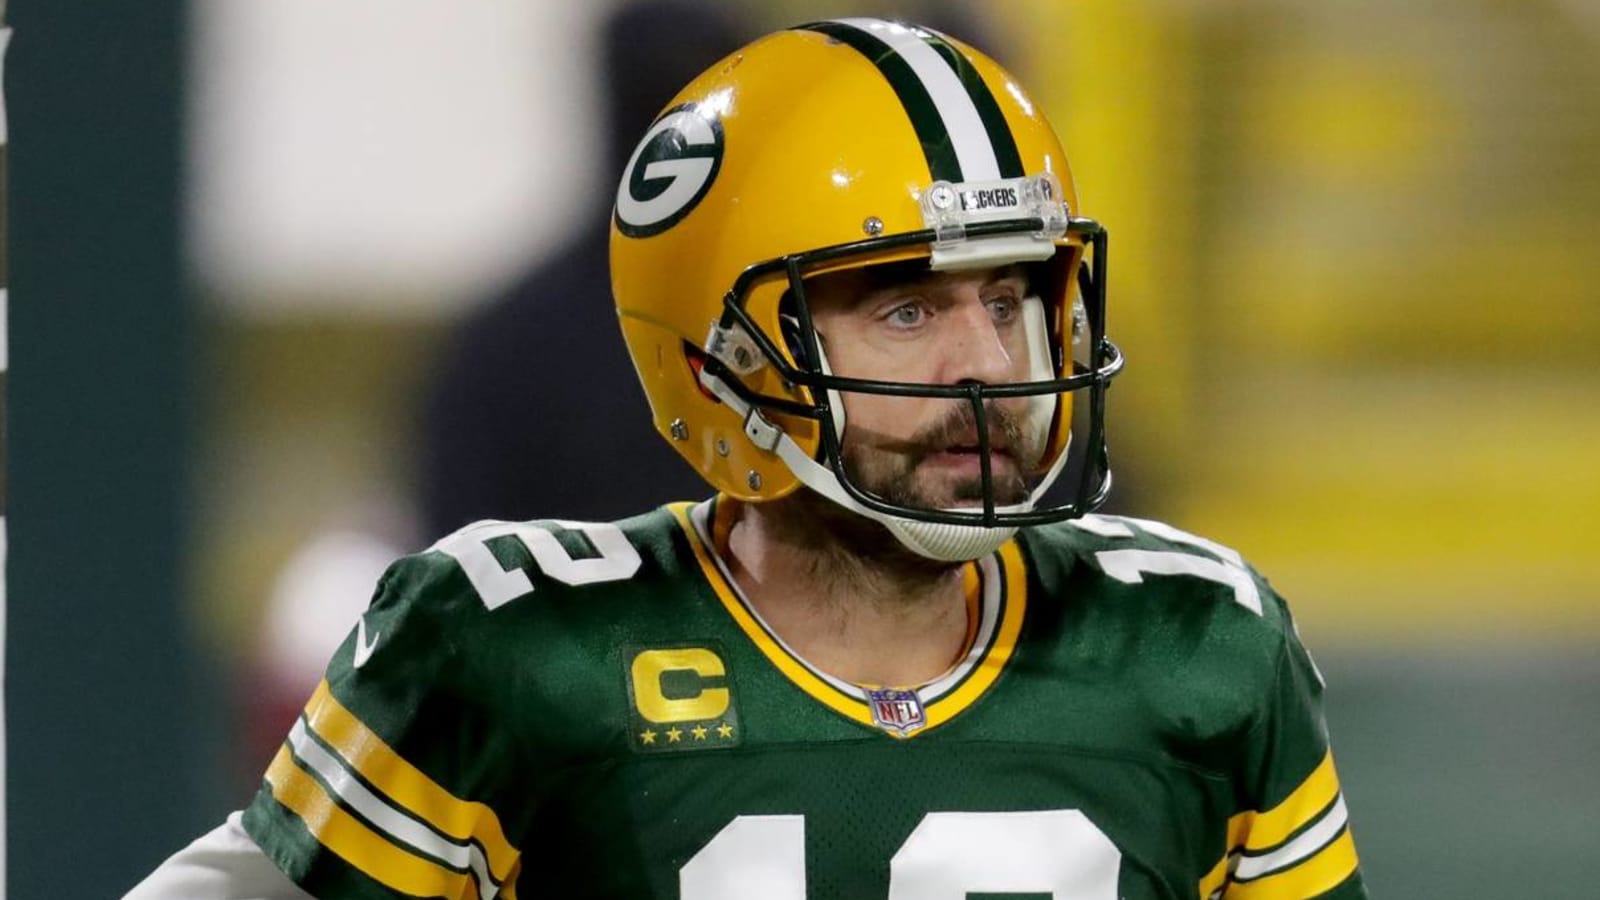 NFL reporters predict when Rodgers will join Packers